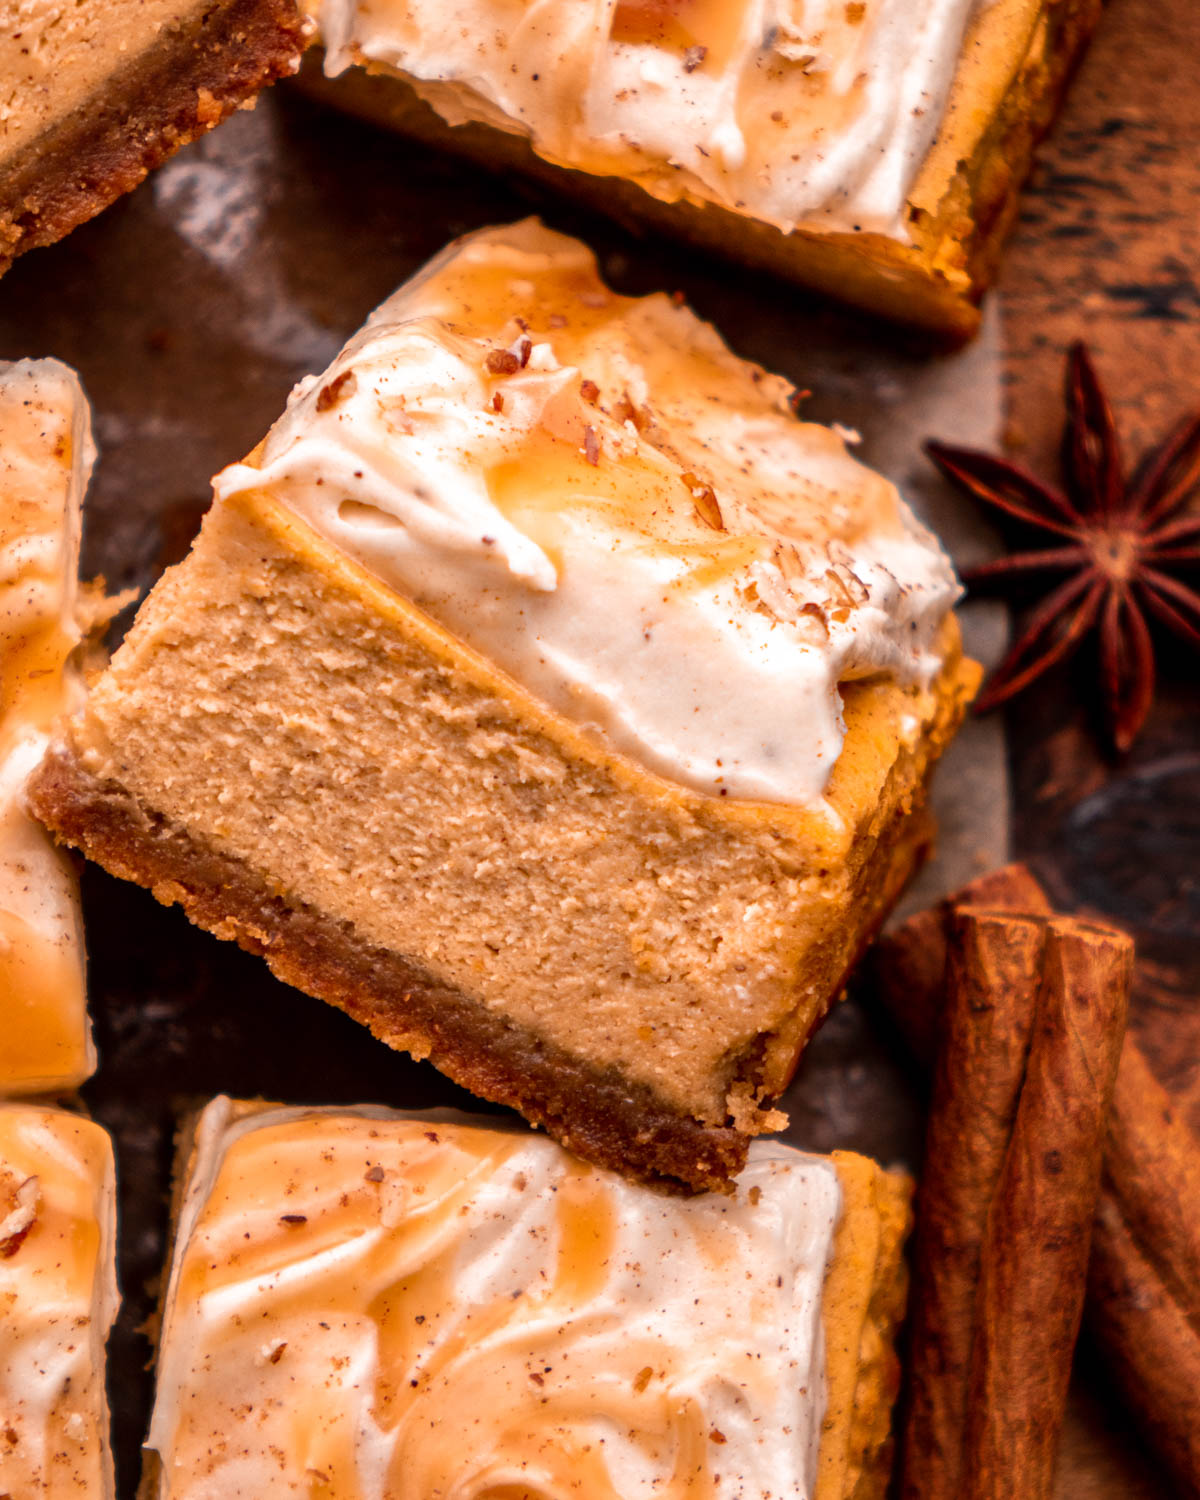 pumpkin cheesecake bar arranged on its side on parchment paper